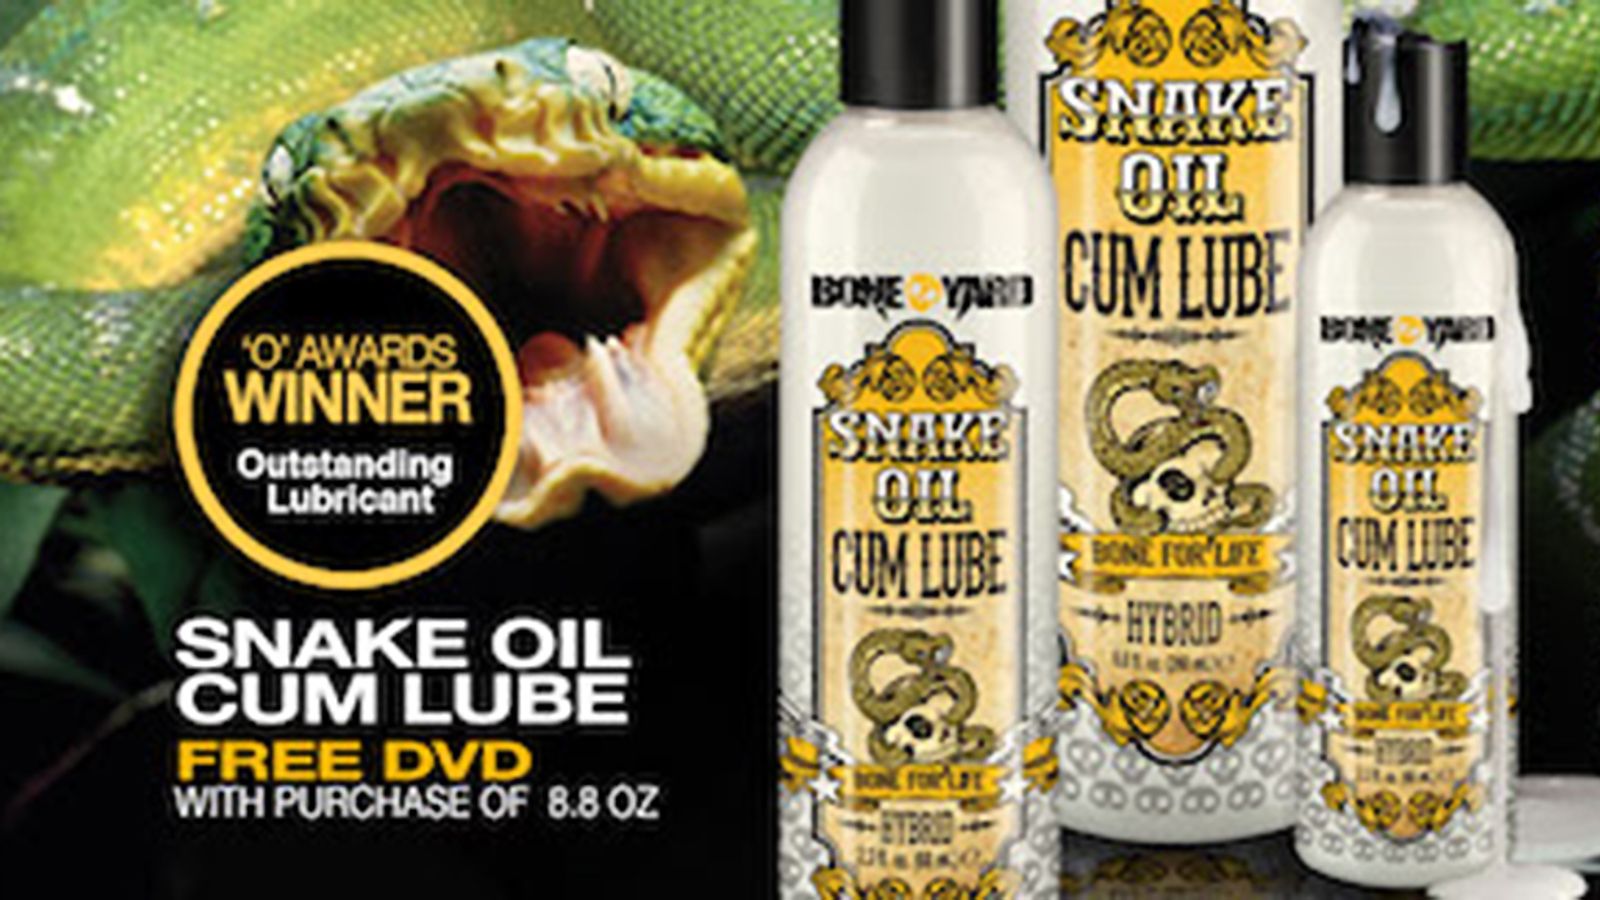 Boneyard Snake Oil Wins Outstanding Lubricant At 2018 “O” Awards